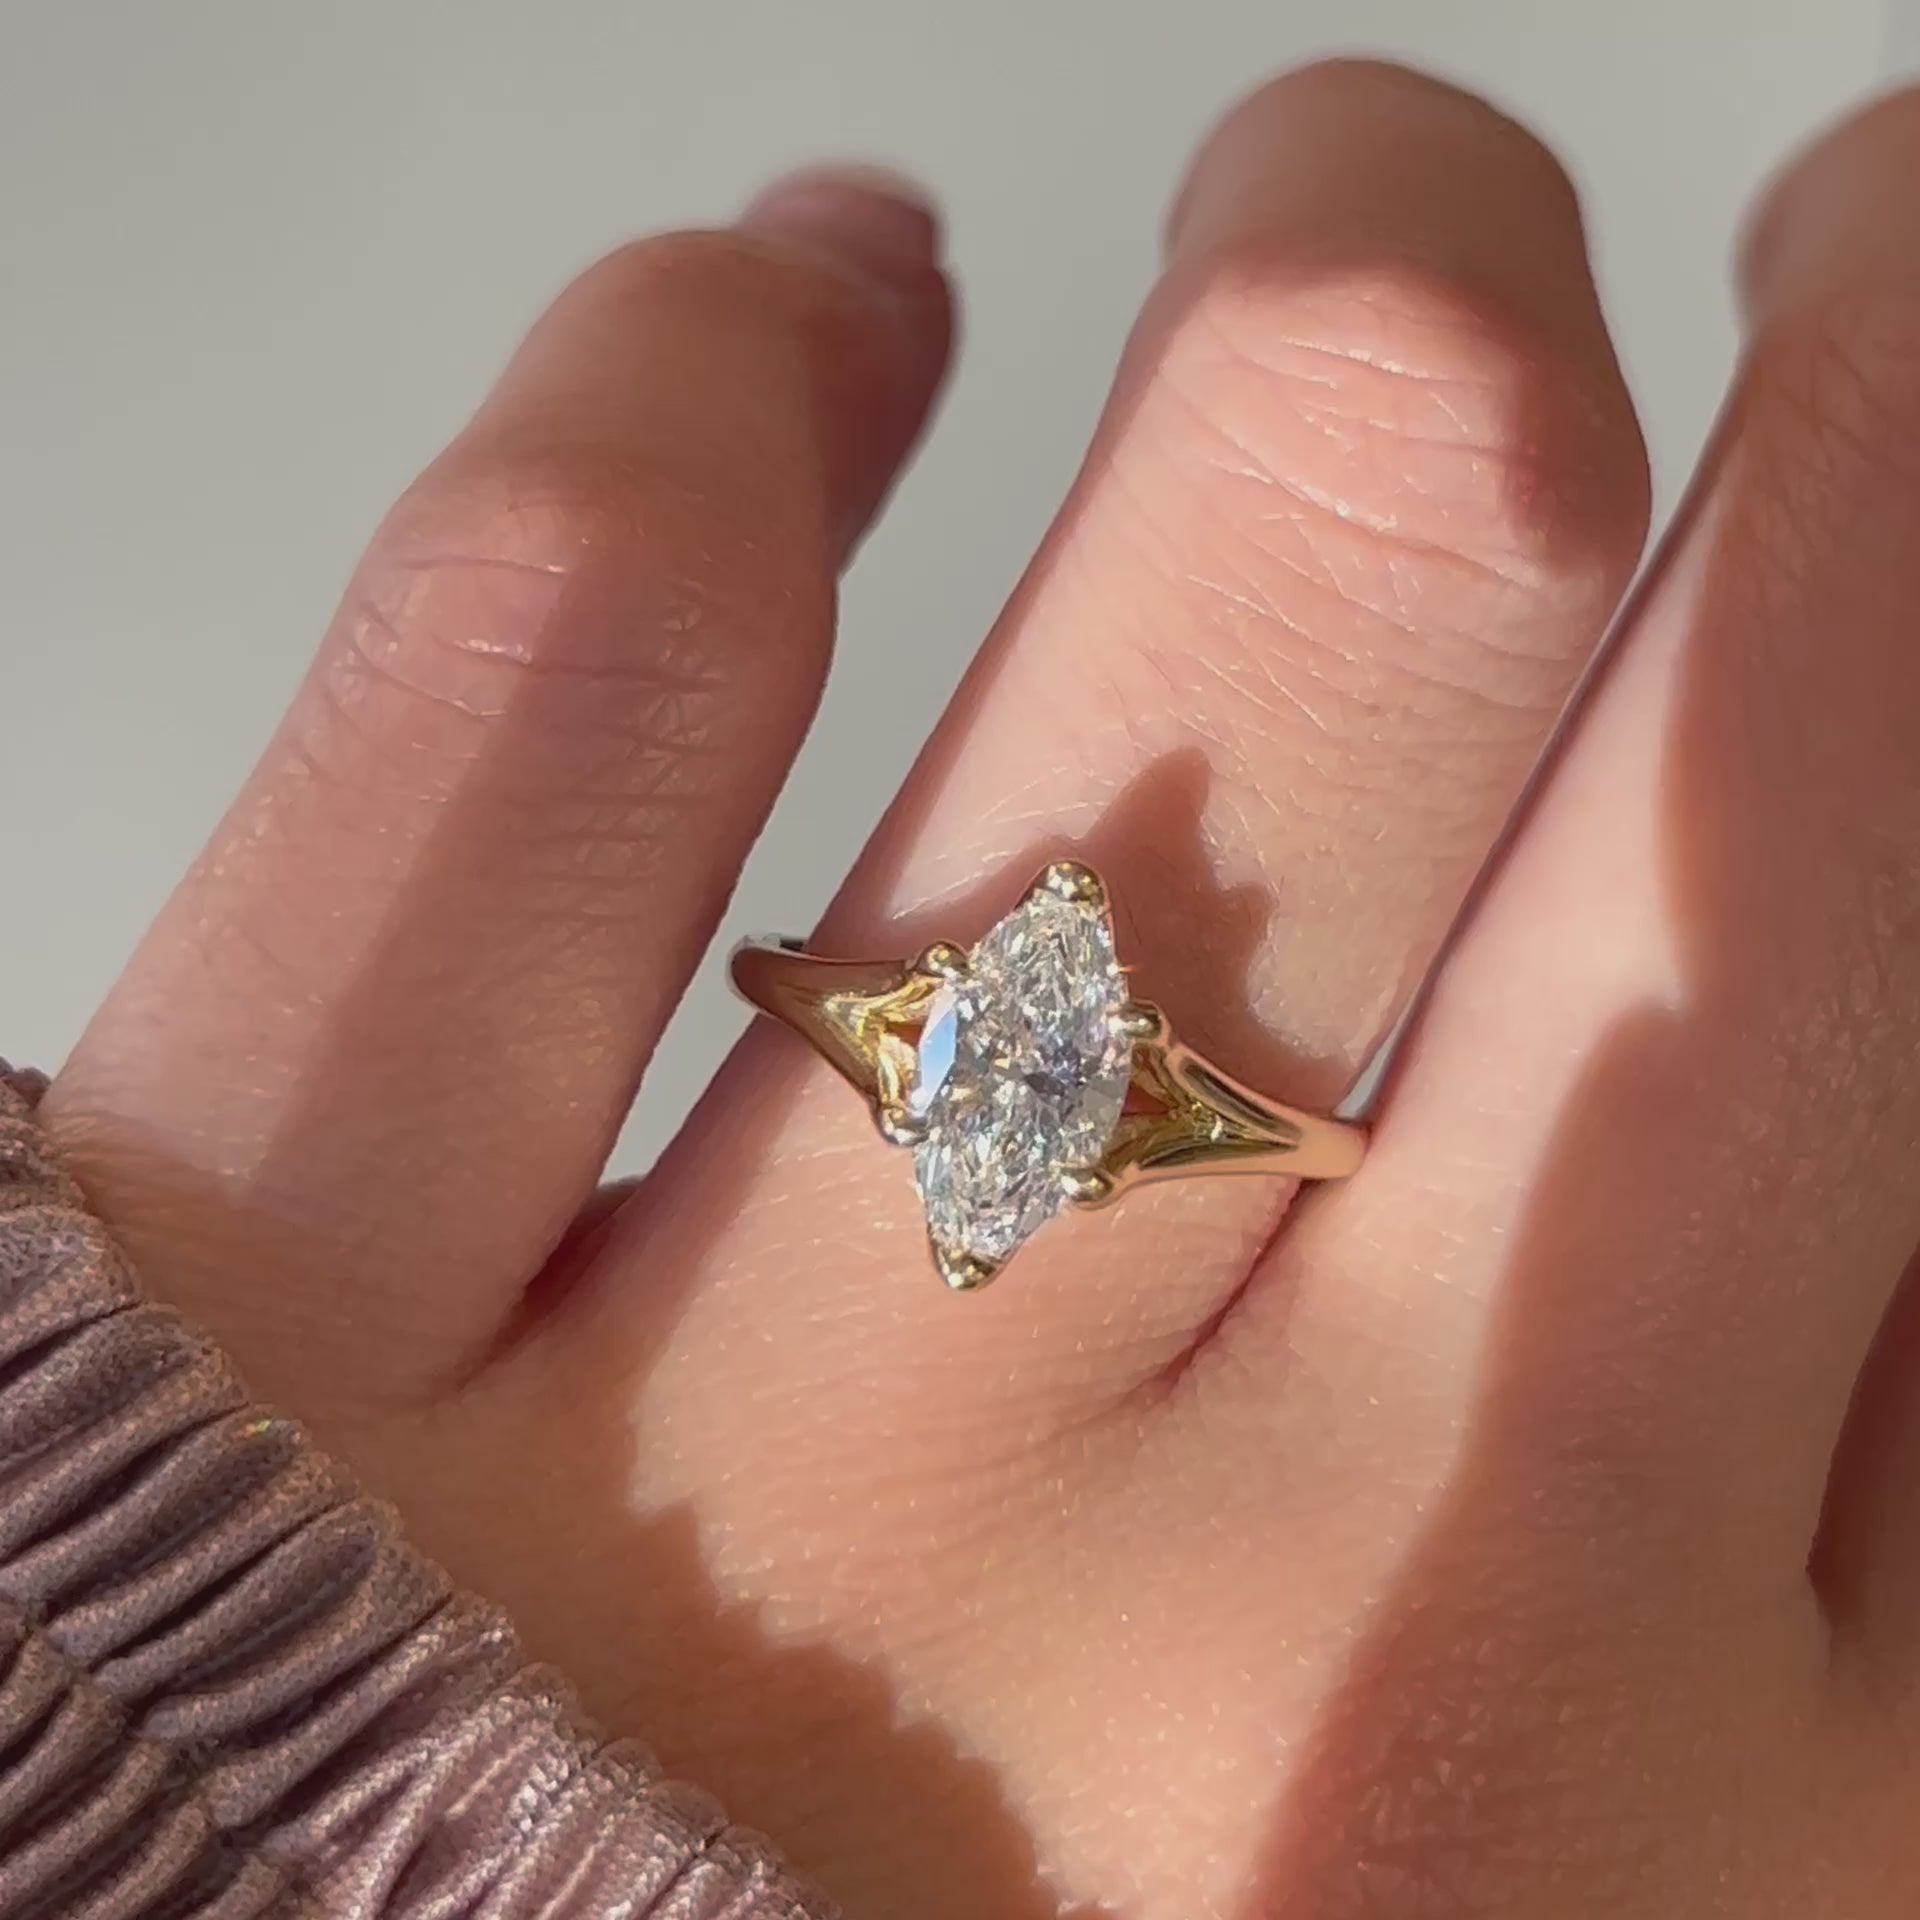 Video of a 14k yellow gold marquise diamond engagement ring